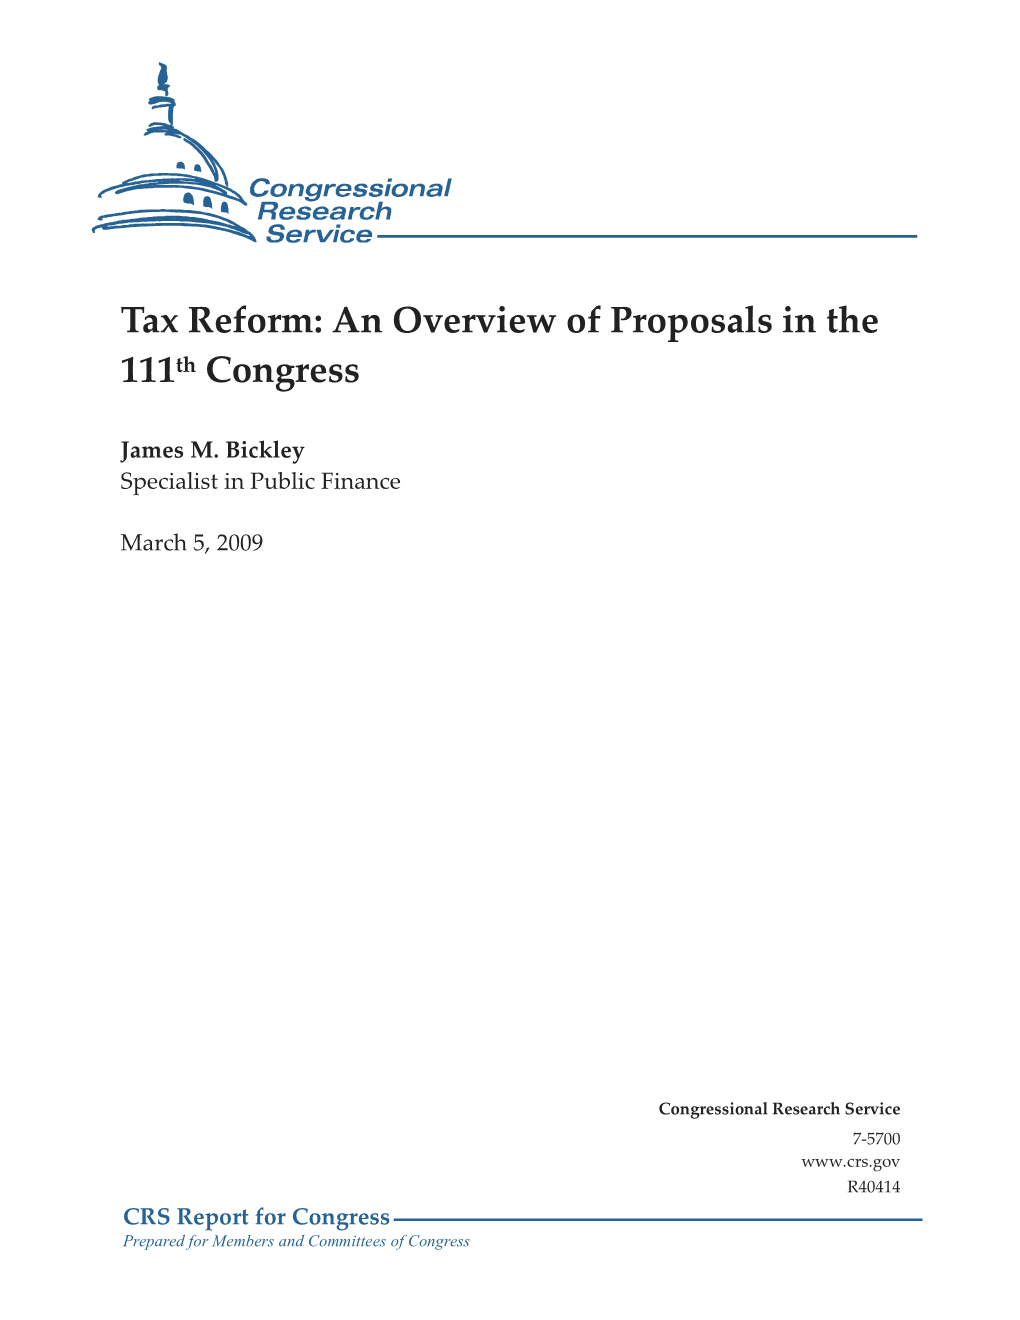 Tax Reform: an Overview of Proposals in the 111Th Congress